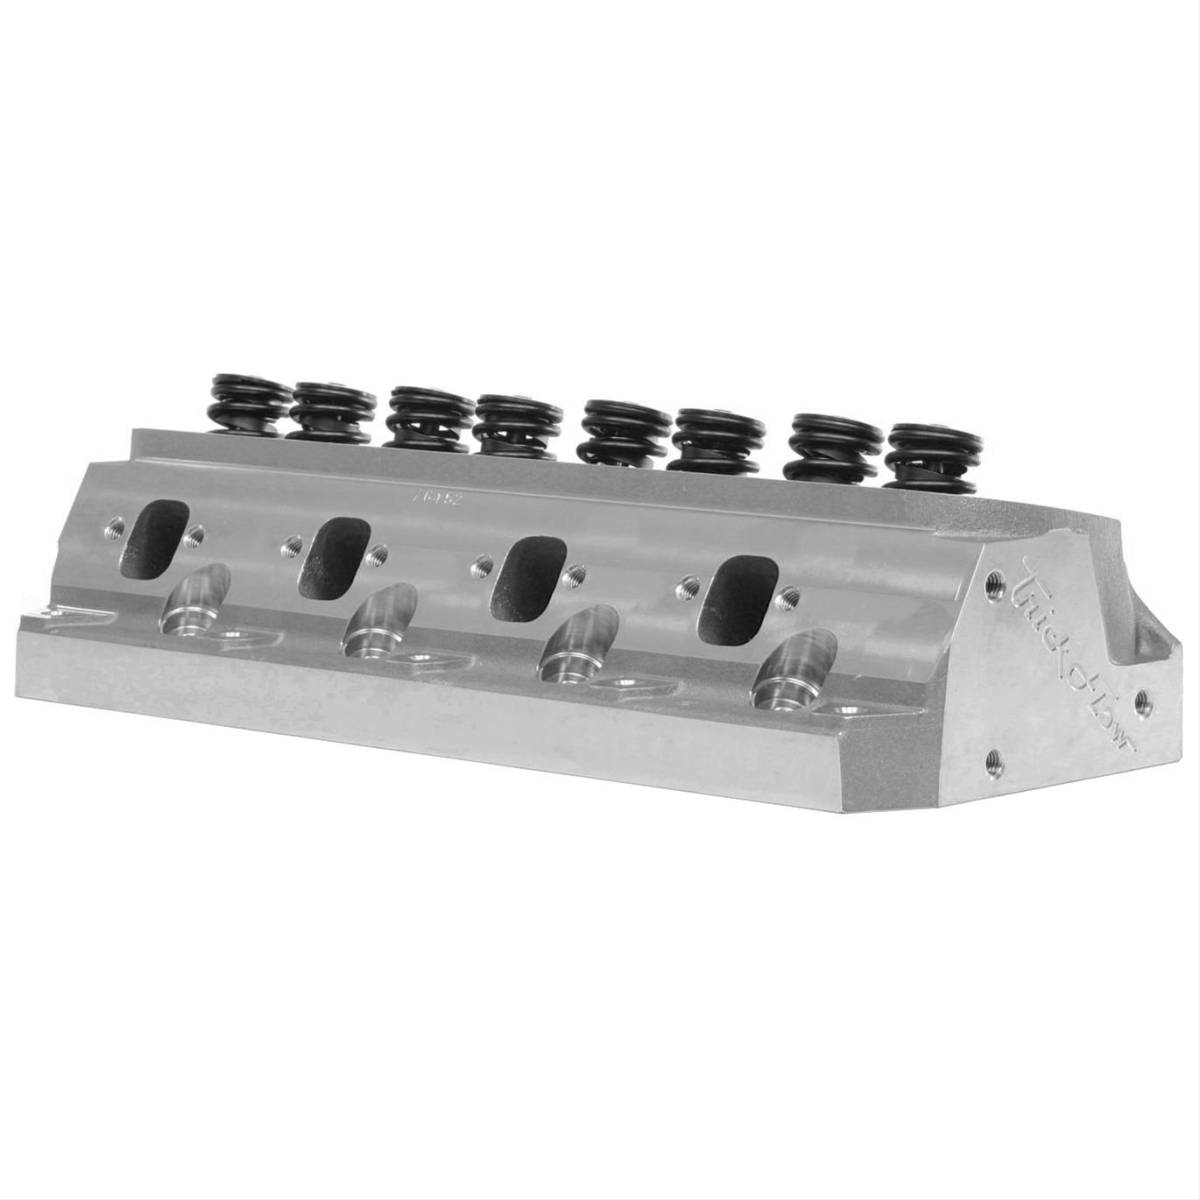 Trickflow - Trickflow Twisted Wedge SBF 170cc Single Cylinder Head 61cc Chambers Max Lift .540 - Image 1